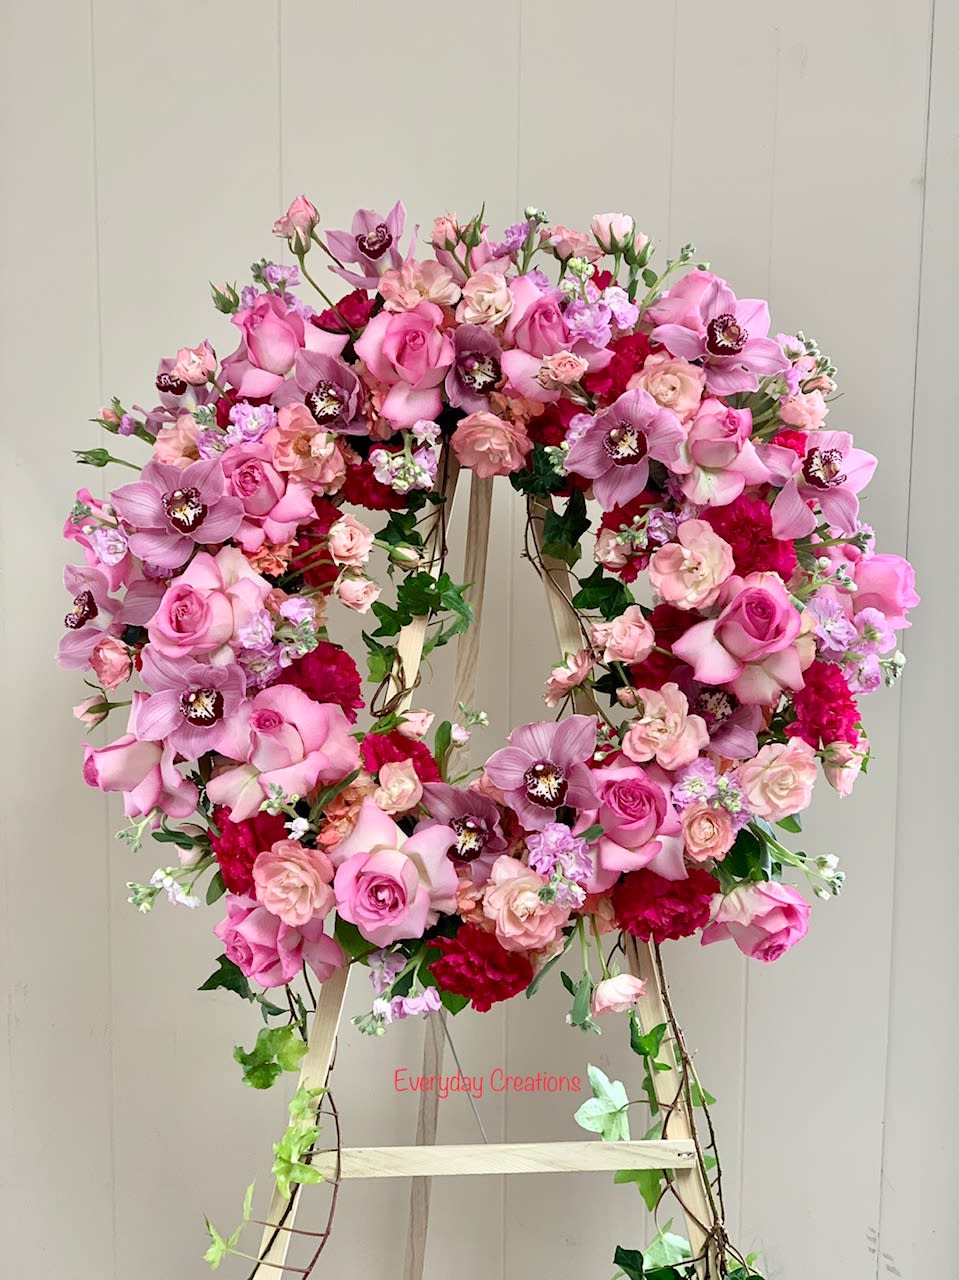 SYM04 - All Pink Funeral Wreath - The warmth and kindness they showed will live on forever, and sometimes this sentiment is best captured through flowers. Our impressive standing funeral wreath arrangement, meticulously handcrafted by expert designers with soothing pink blooms for a lush, full presentation, creates a truly memorable tribute. Crafted in a round design, this magnificent pink funeral wreath features the highest quality luxury blooms such as roses, stock, spray roses and cymbidium orchids. 